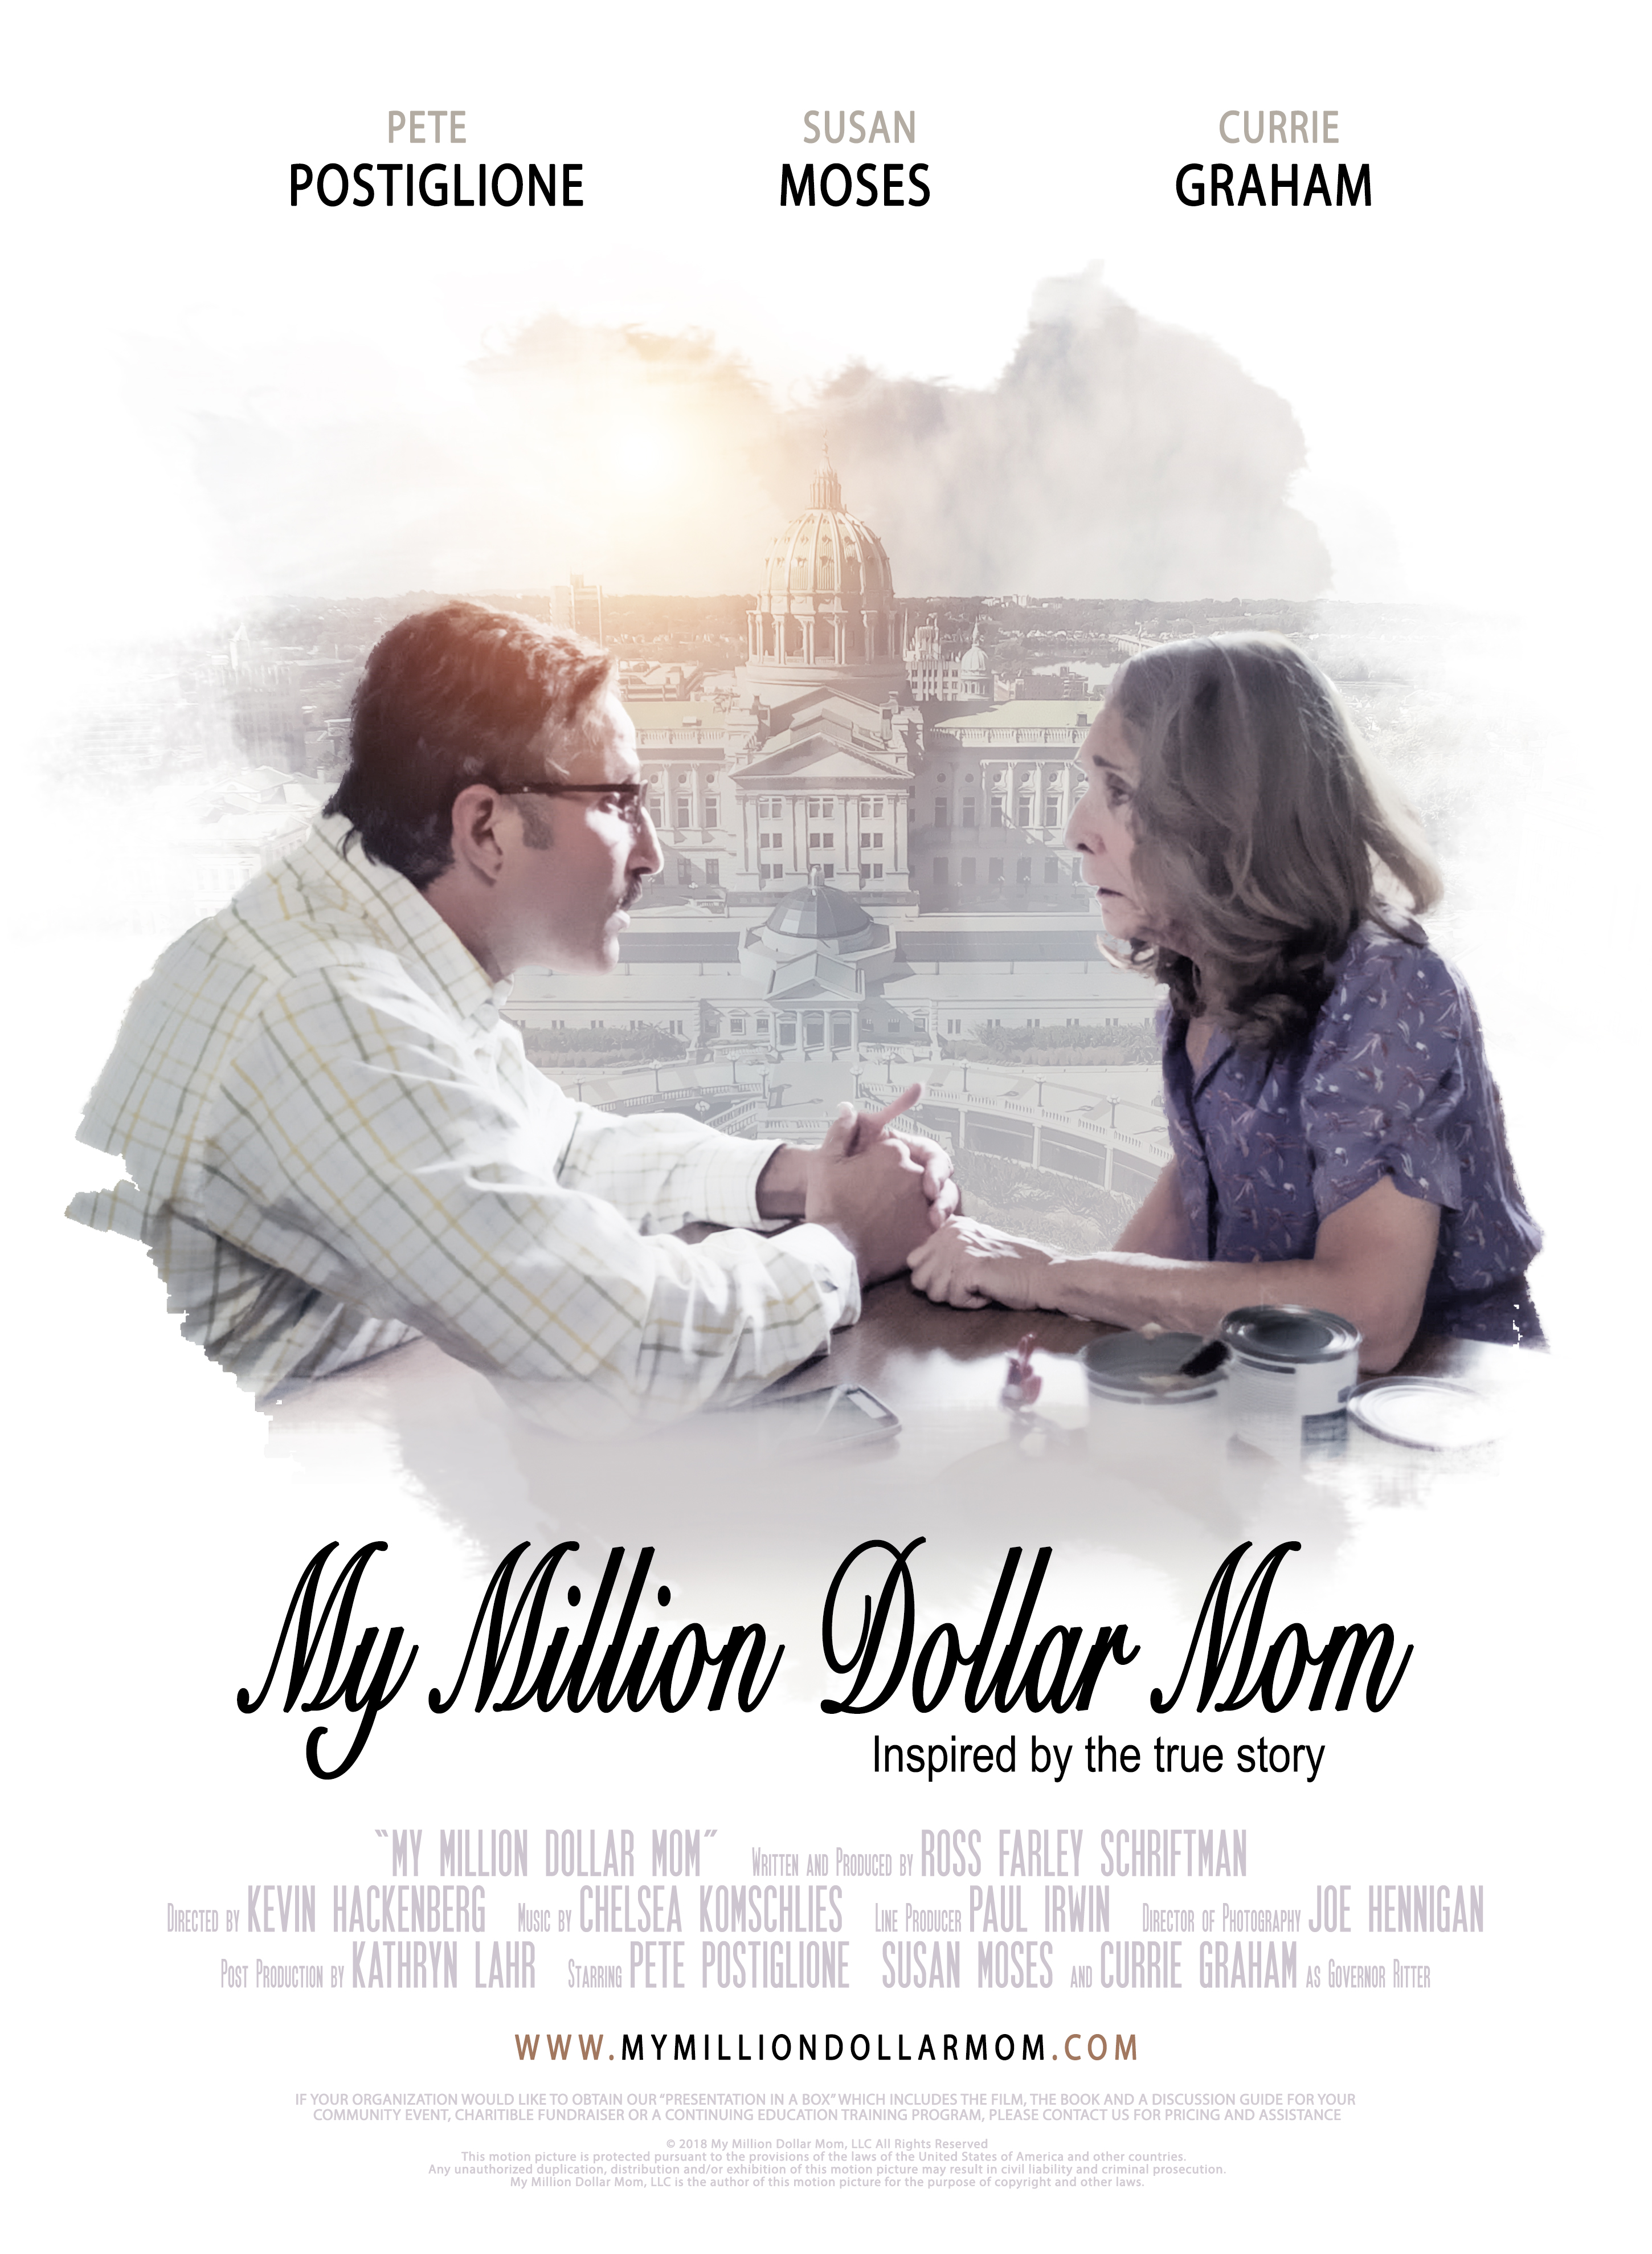 My Million Dollar Mom, a film shot in the Philadelphia area and based on Ross Schriftman’s book by the same name, has been accepted into the Orlando International Film Festival.